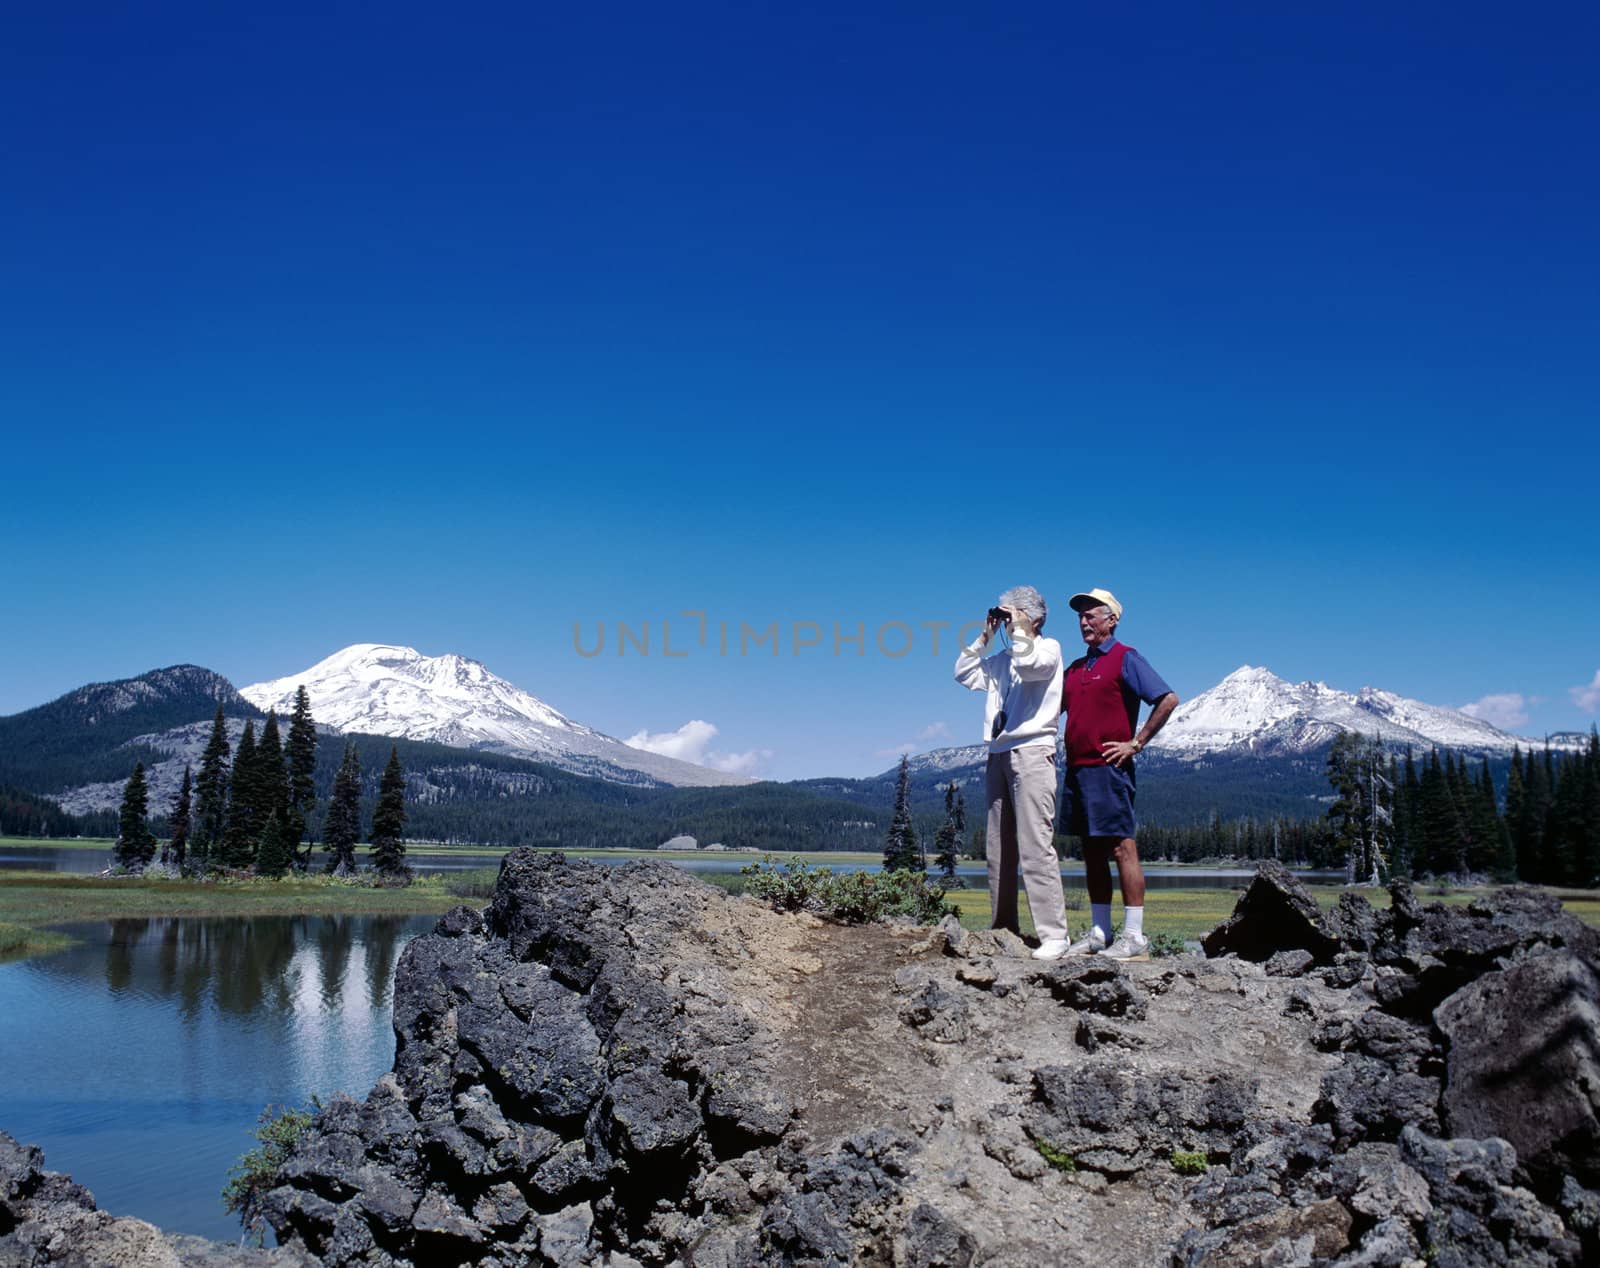 Mountains in Oregon in Cascades range with a lake and a man and a woman in the foreground